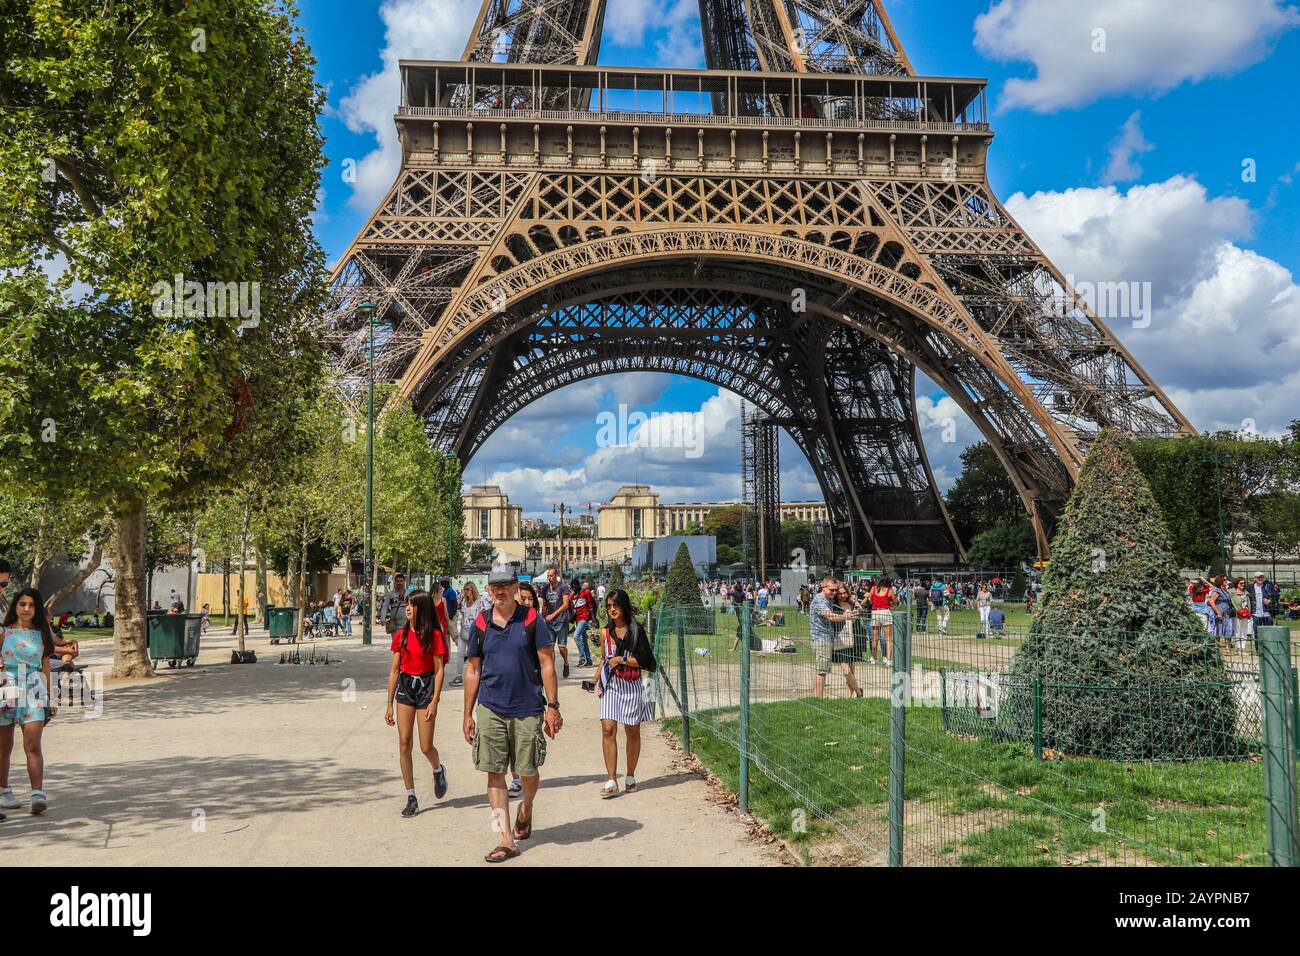 Eiffel Tower & tourists in Paris, France, Europe Stock Photo